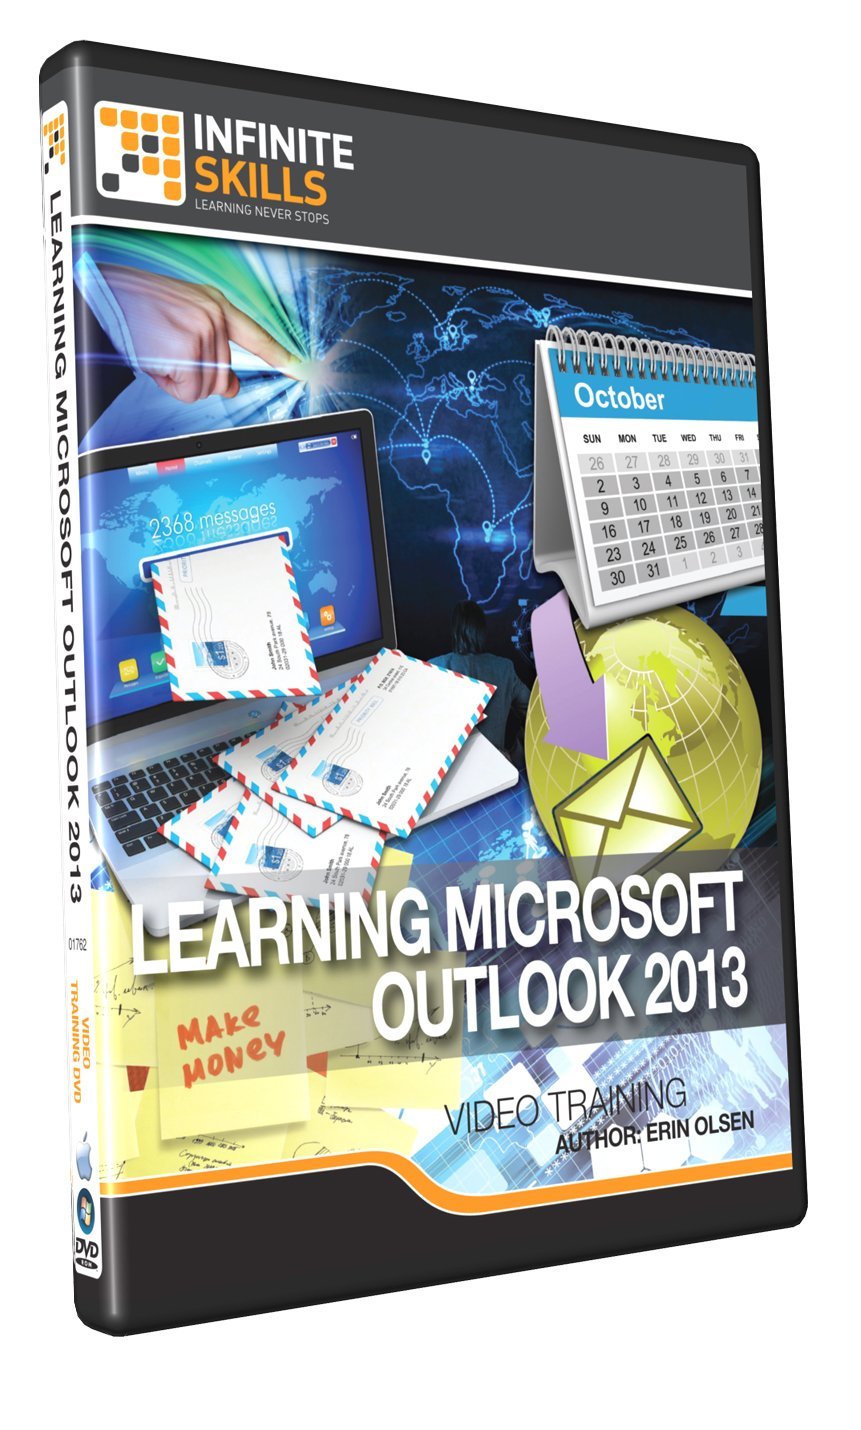 Learning Microsoft Outlook 2013